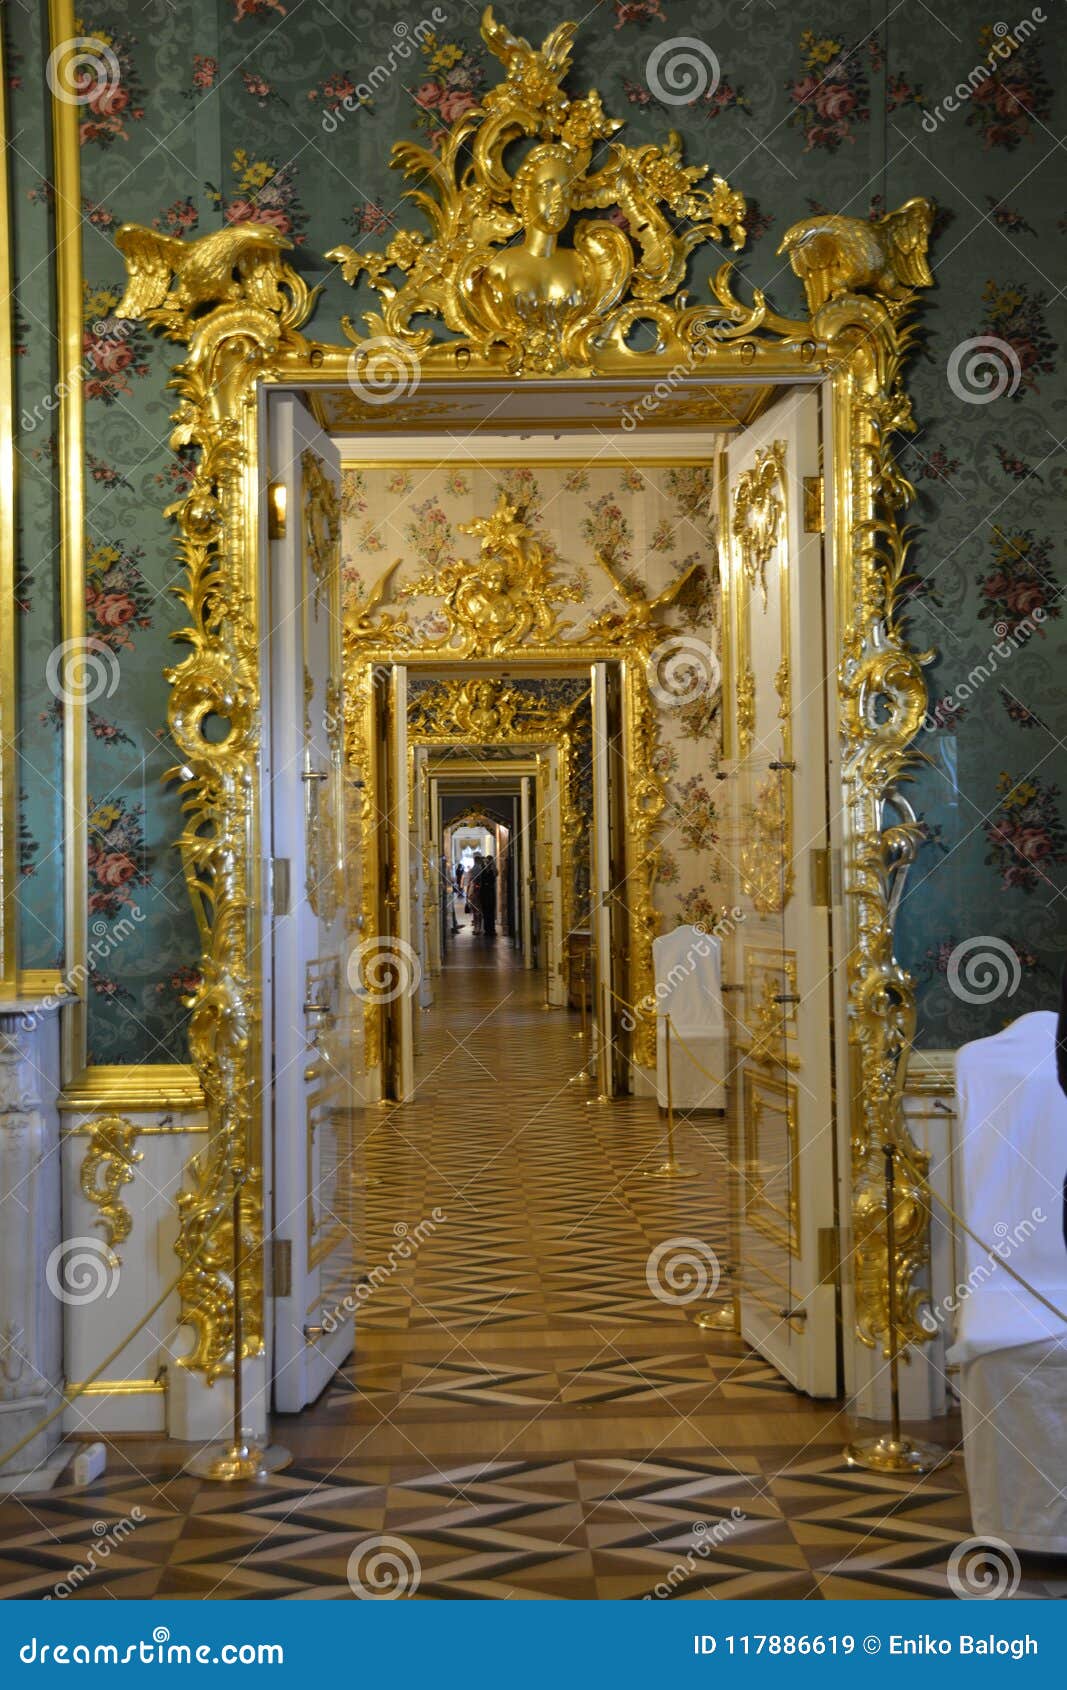 Grand Palace in Peterhof | Suburbs and royal residences | St.Petersburg